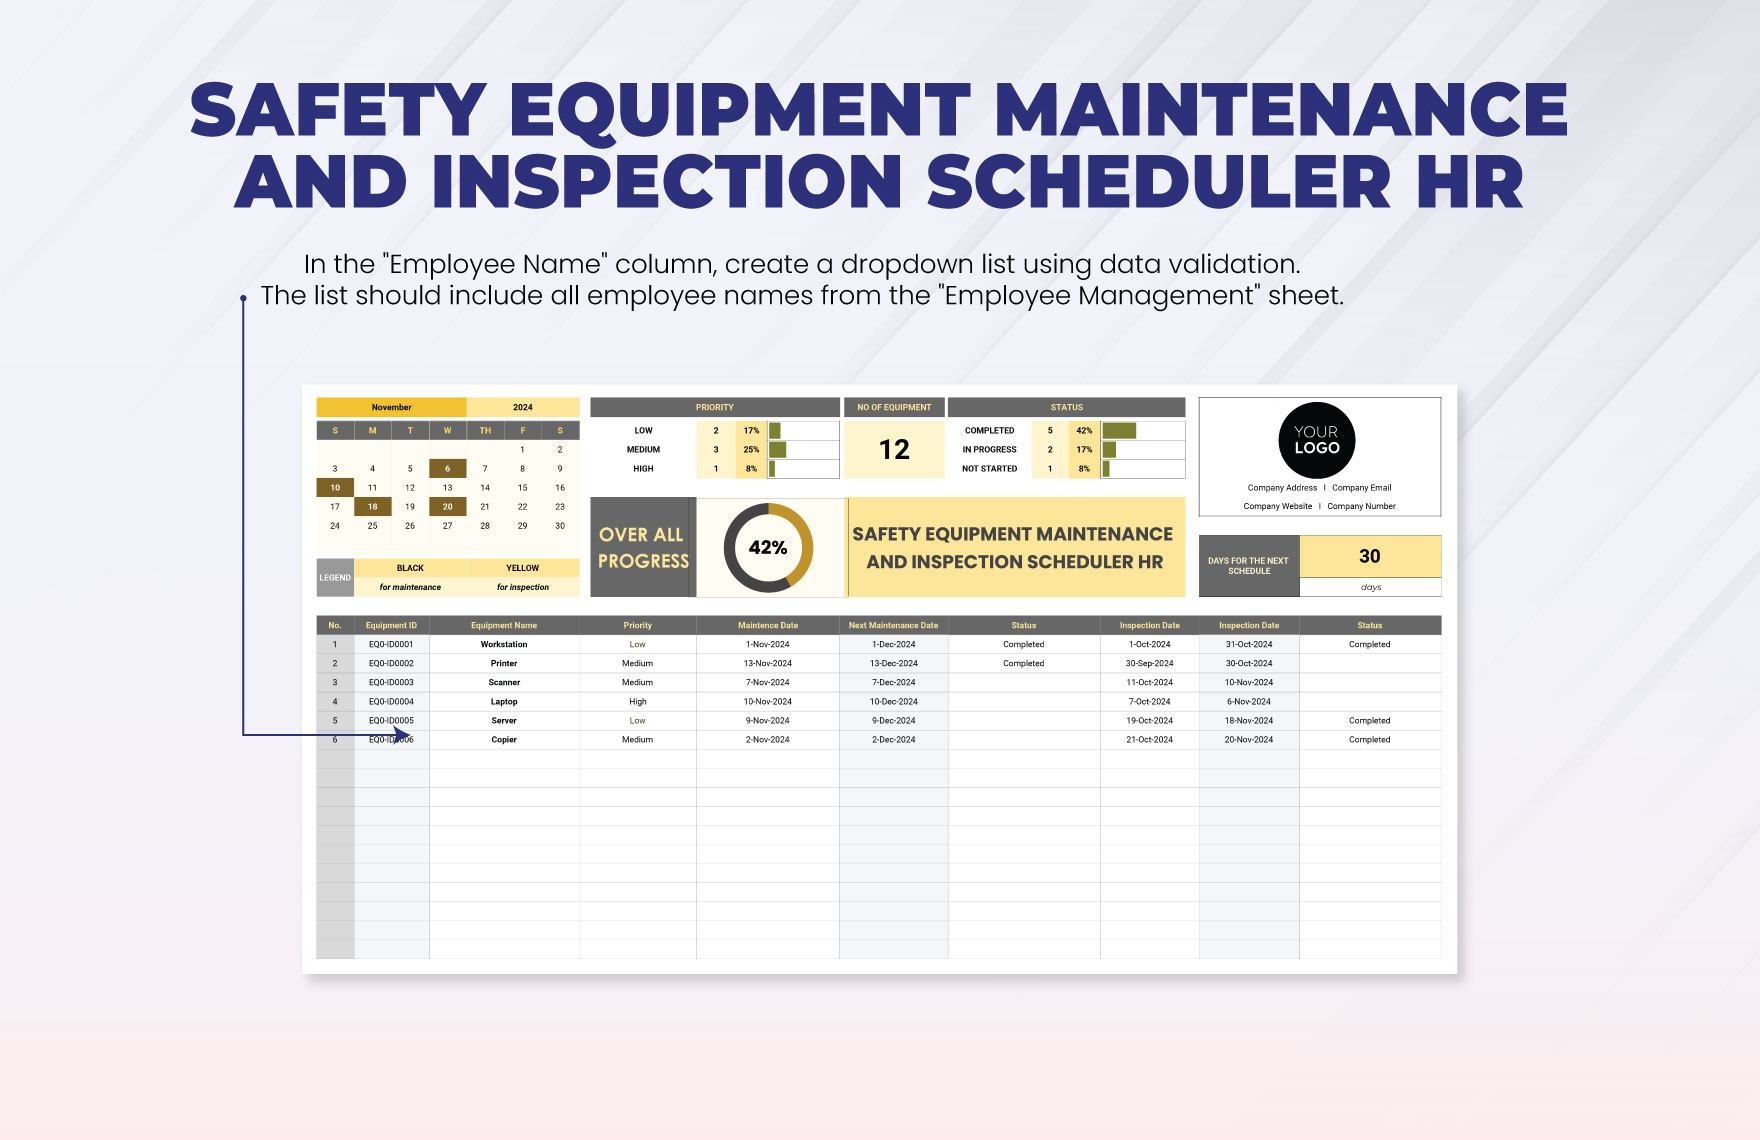 Safety Equipment Maintenance and Inspection Scheduler HR Template